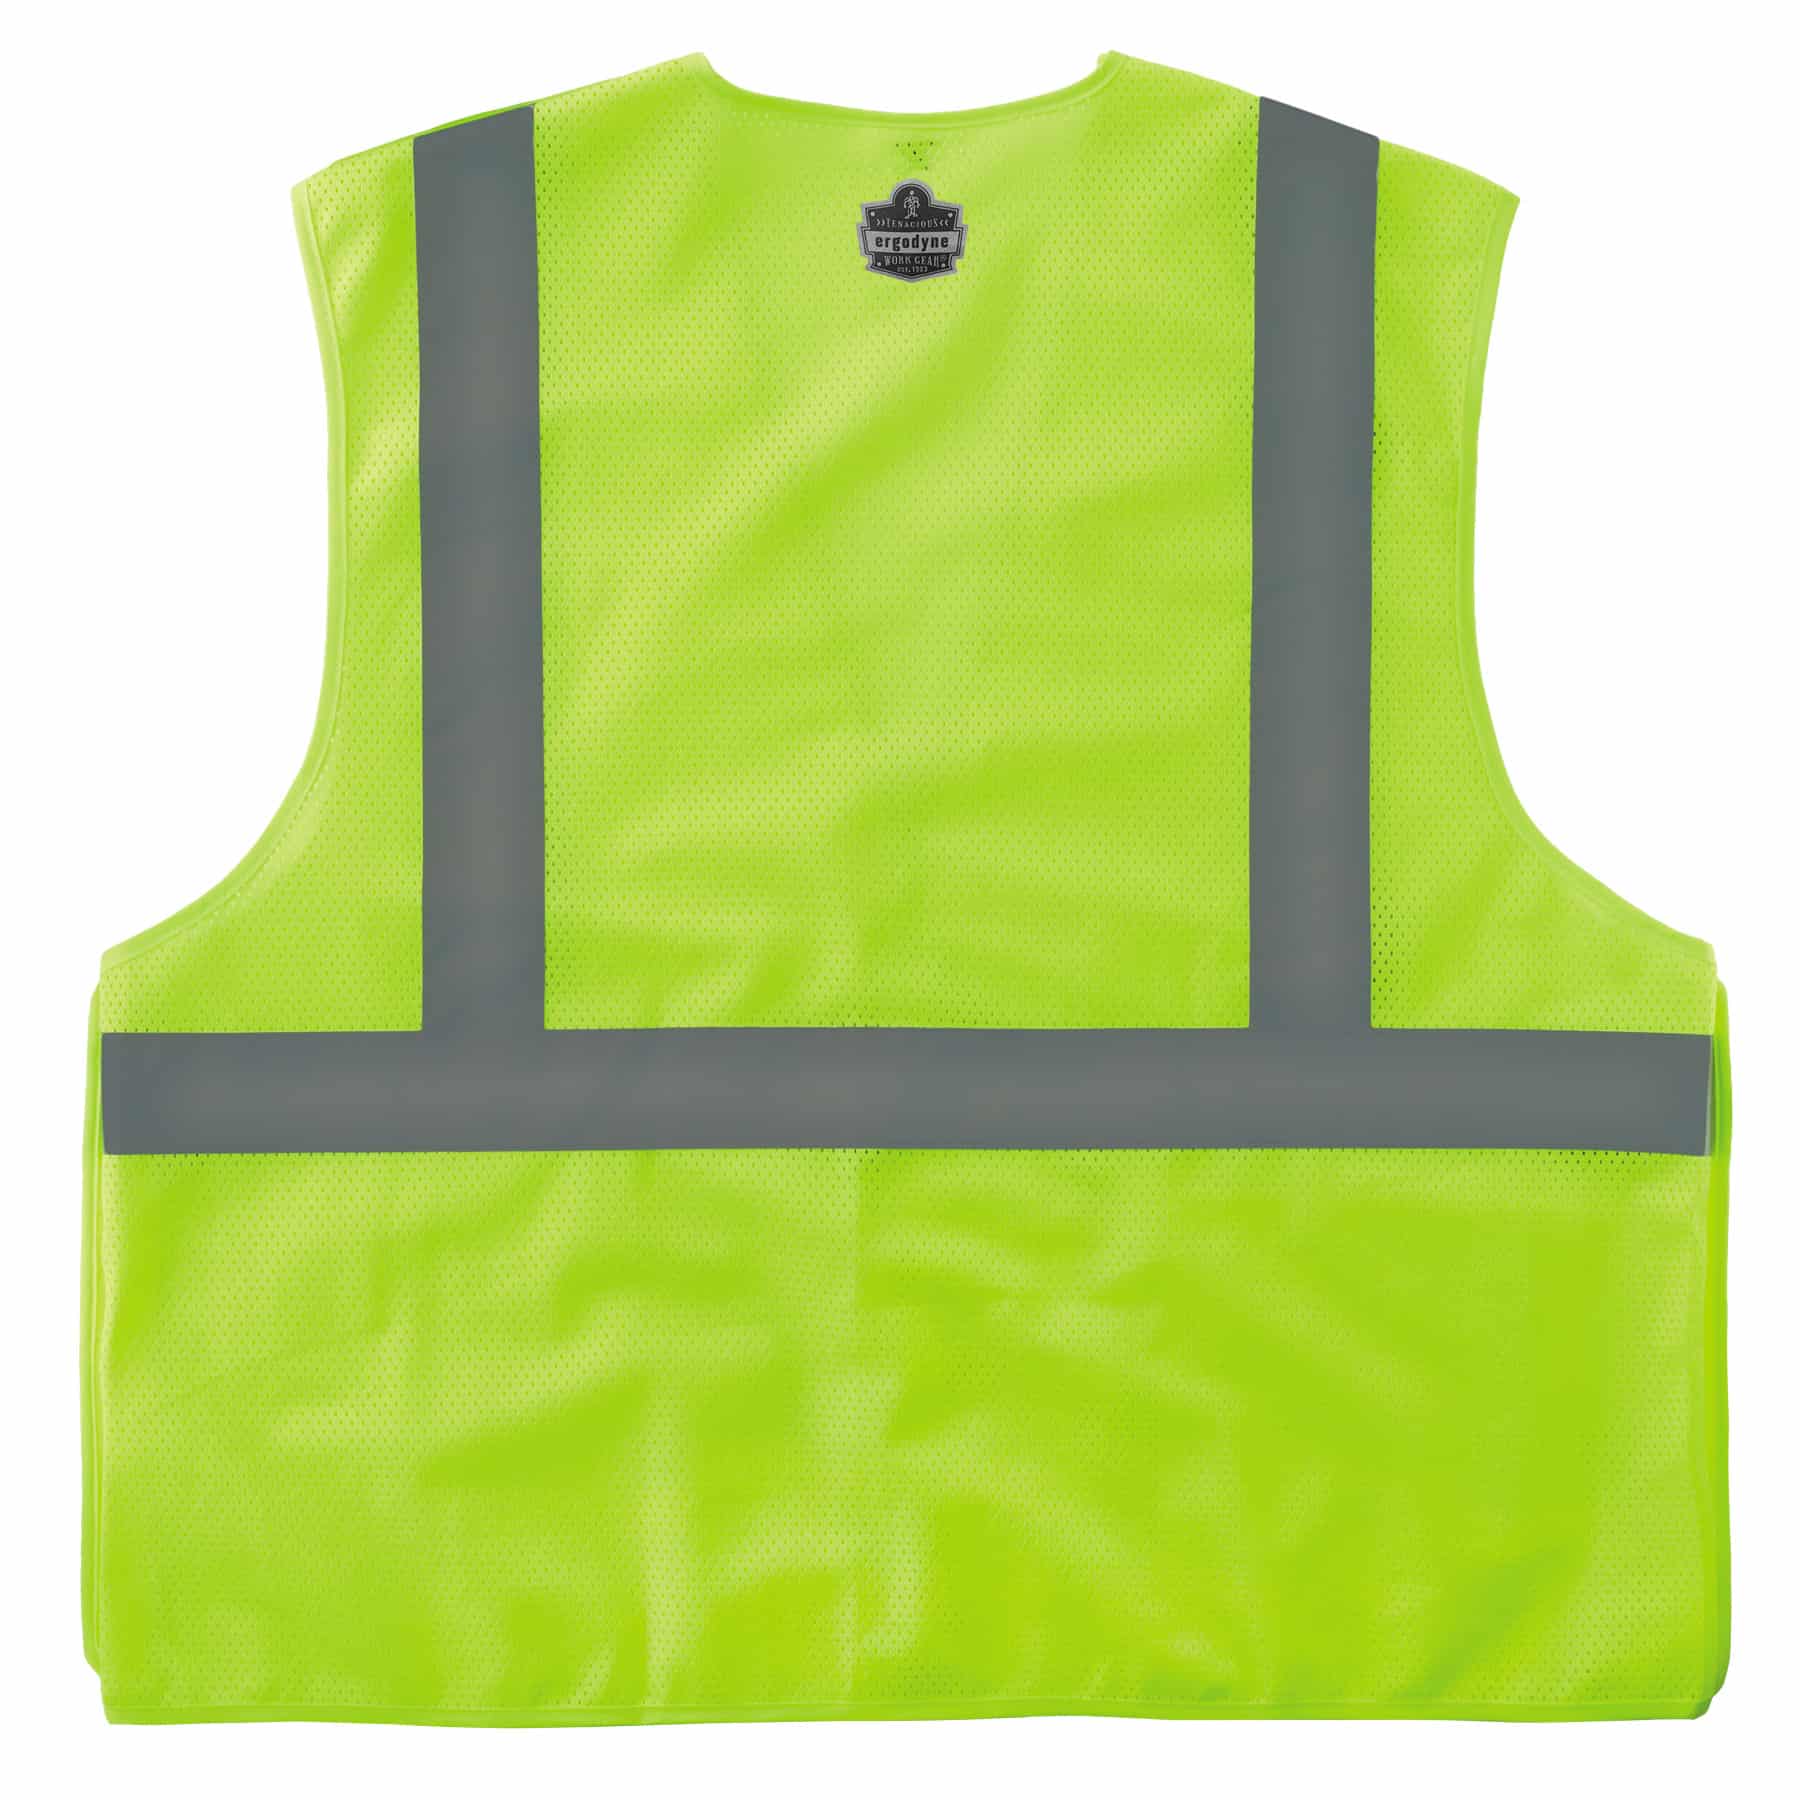 Dummy Code for Tools Size 4X-5X Fluorescent Yellow/Green Trumbull Industries JOB SIGHT FR V81522.4X-5X Class 2 2 Vest with Hook and Loop 